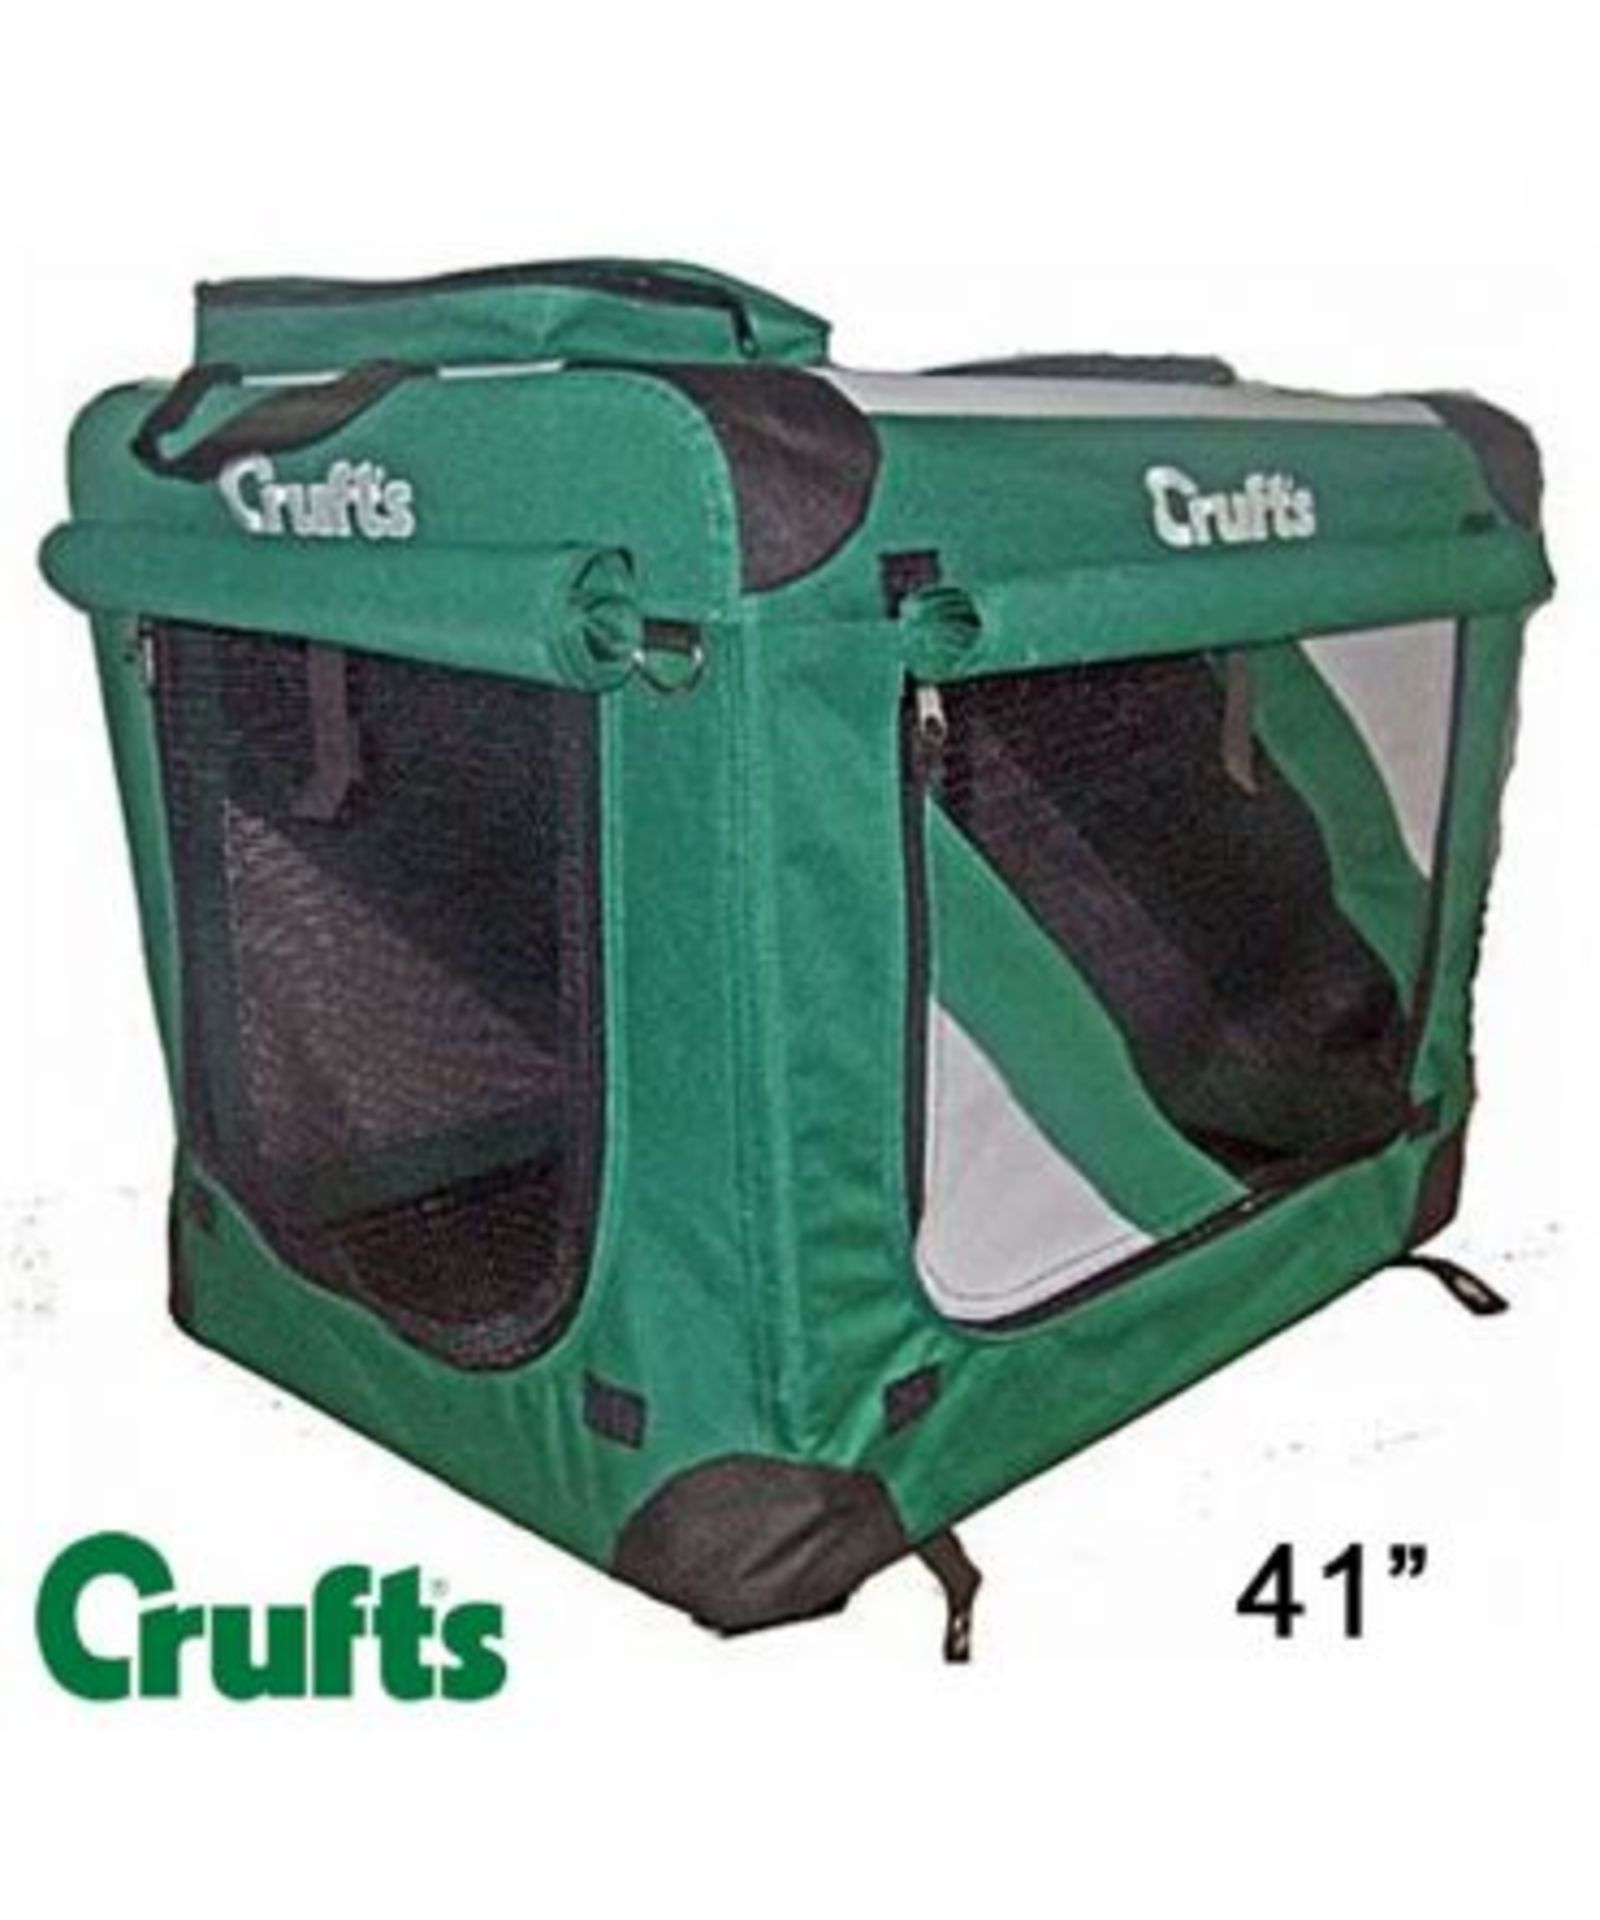 60 x 41" Crufts Soft Crate. Large. Total RRP £6,480